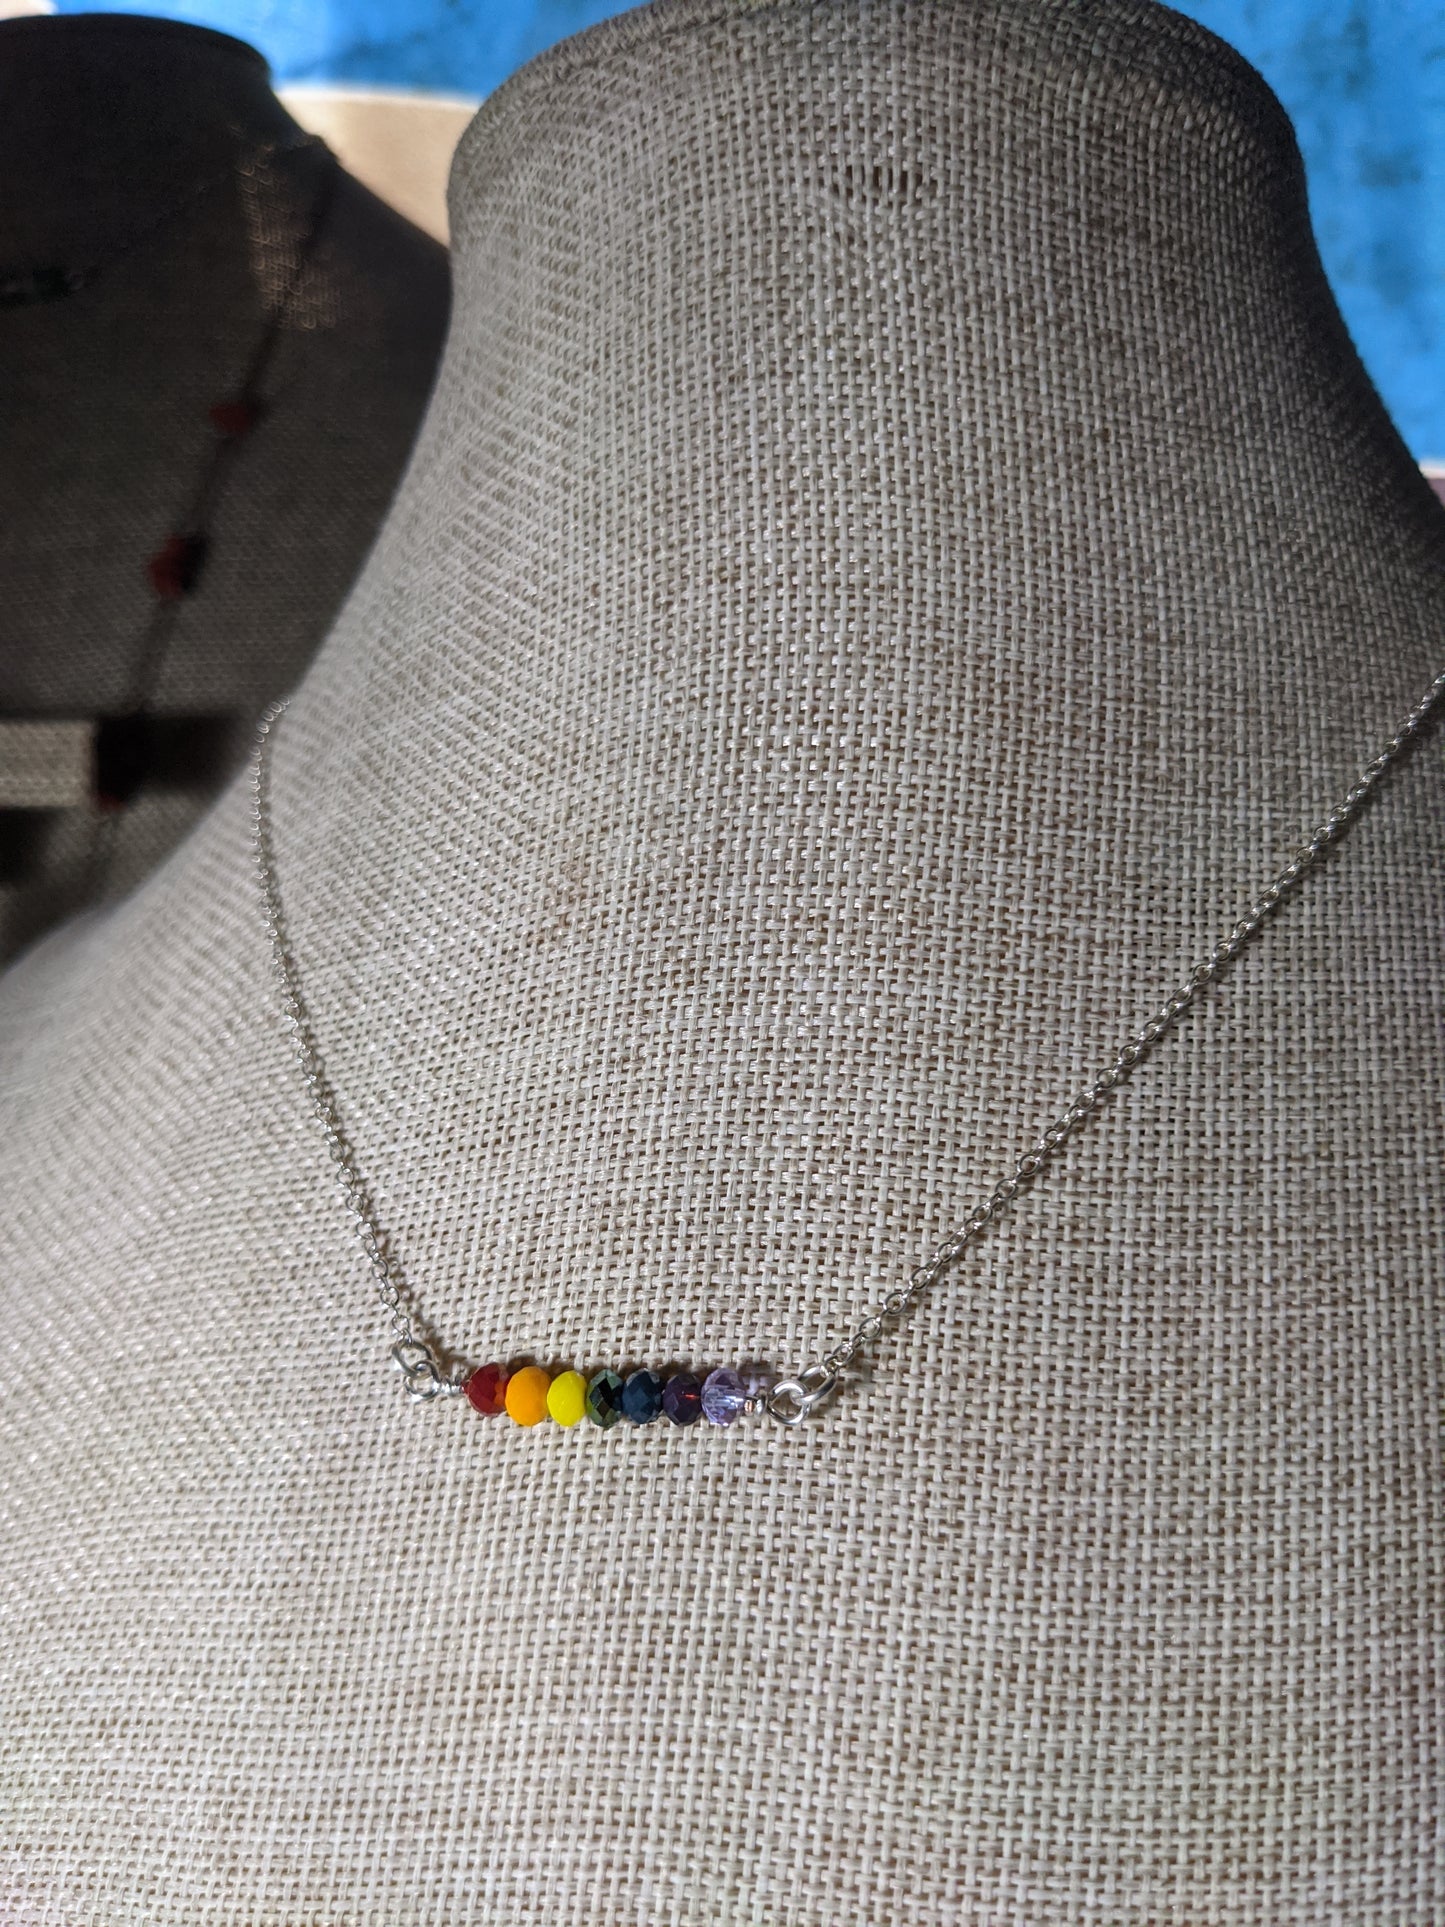 Rainbow Pride Necklace on Sterling Silver (MTO)